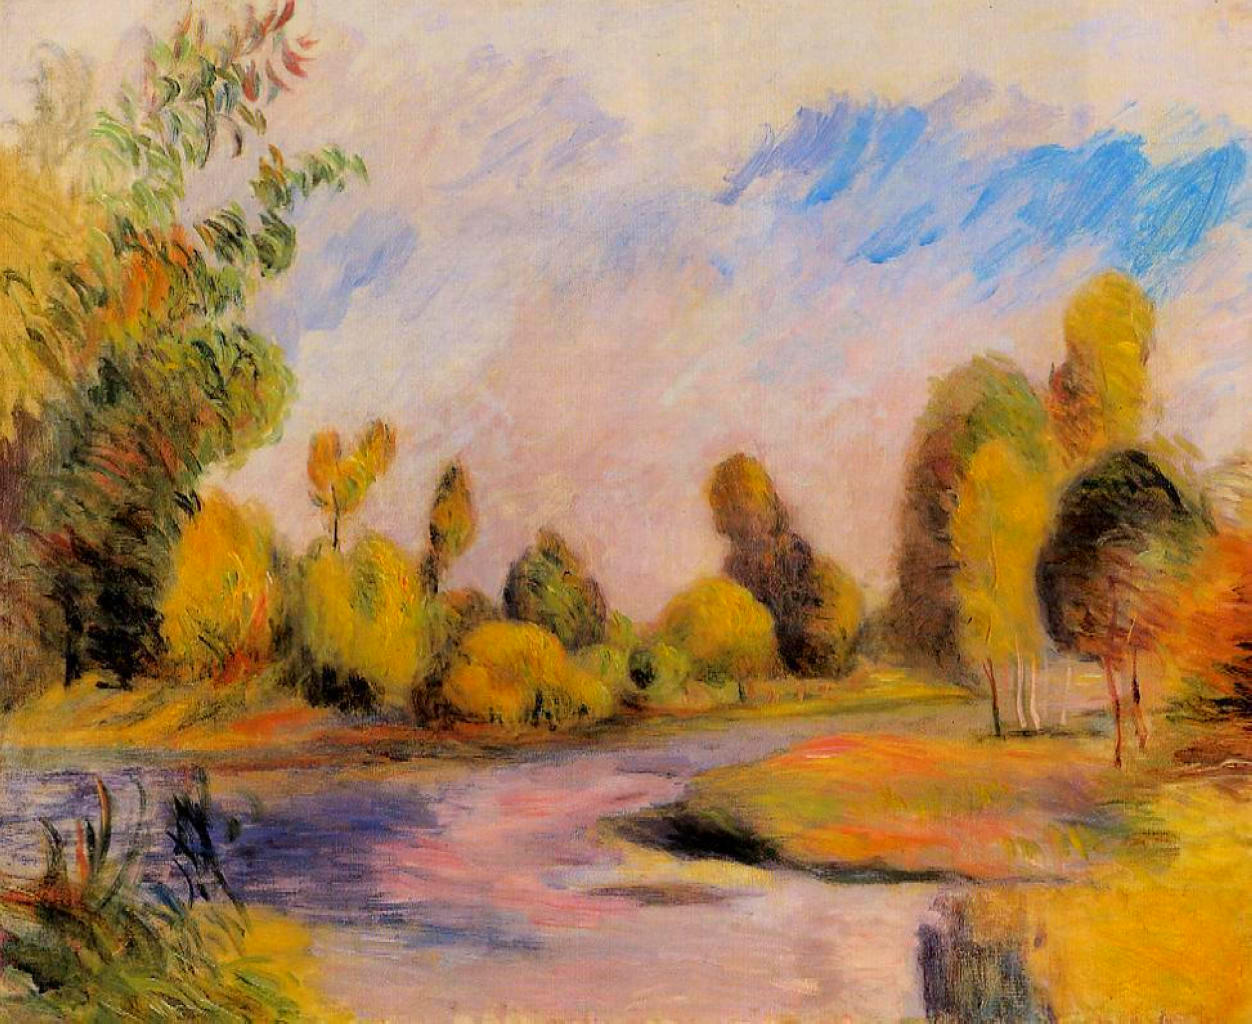 Banks of a River - Pierre-Auguste Renoir painting on canvas